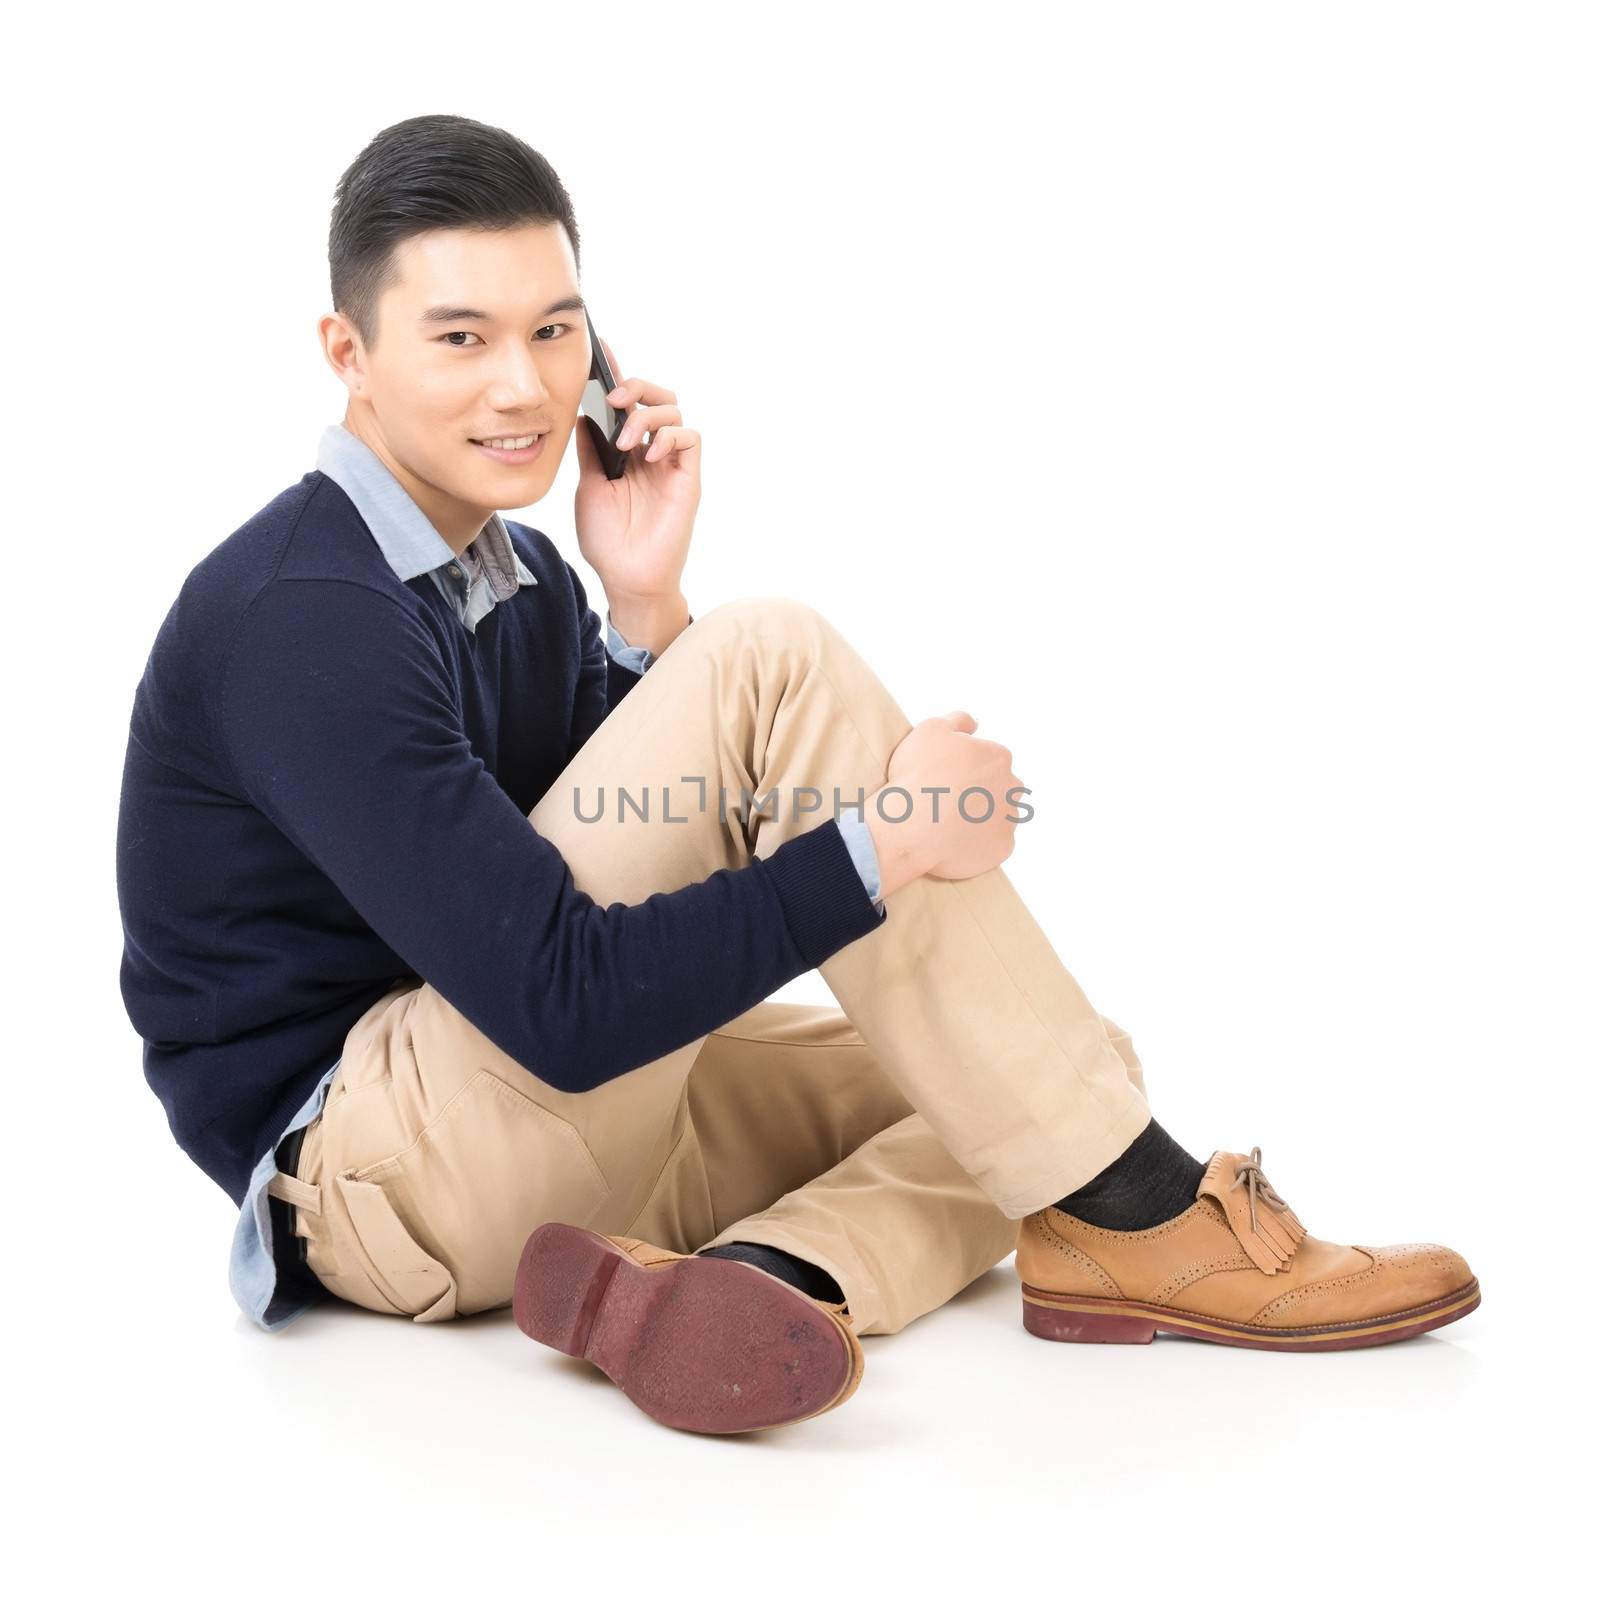 Attractive young man of Asian take a call and sit on ground, full length portrait.